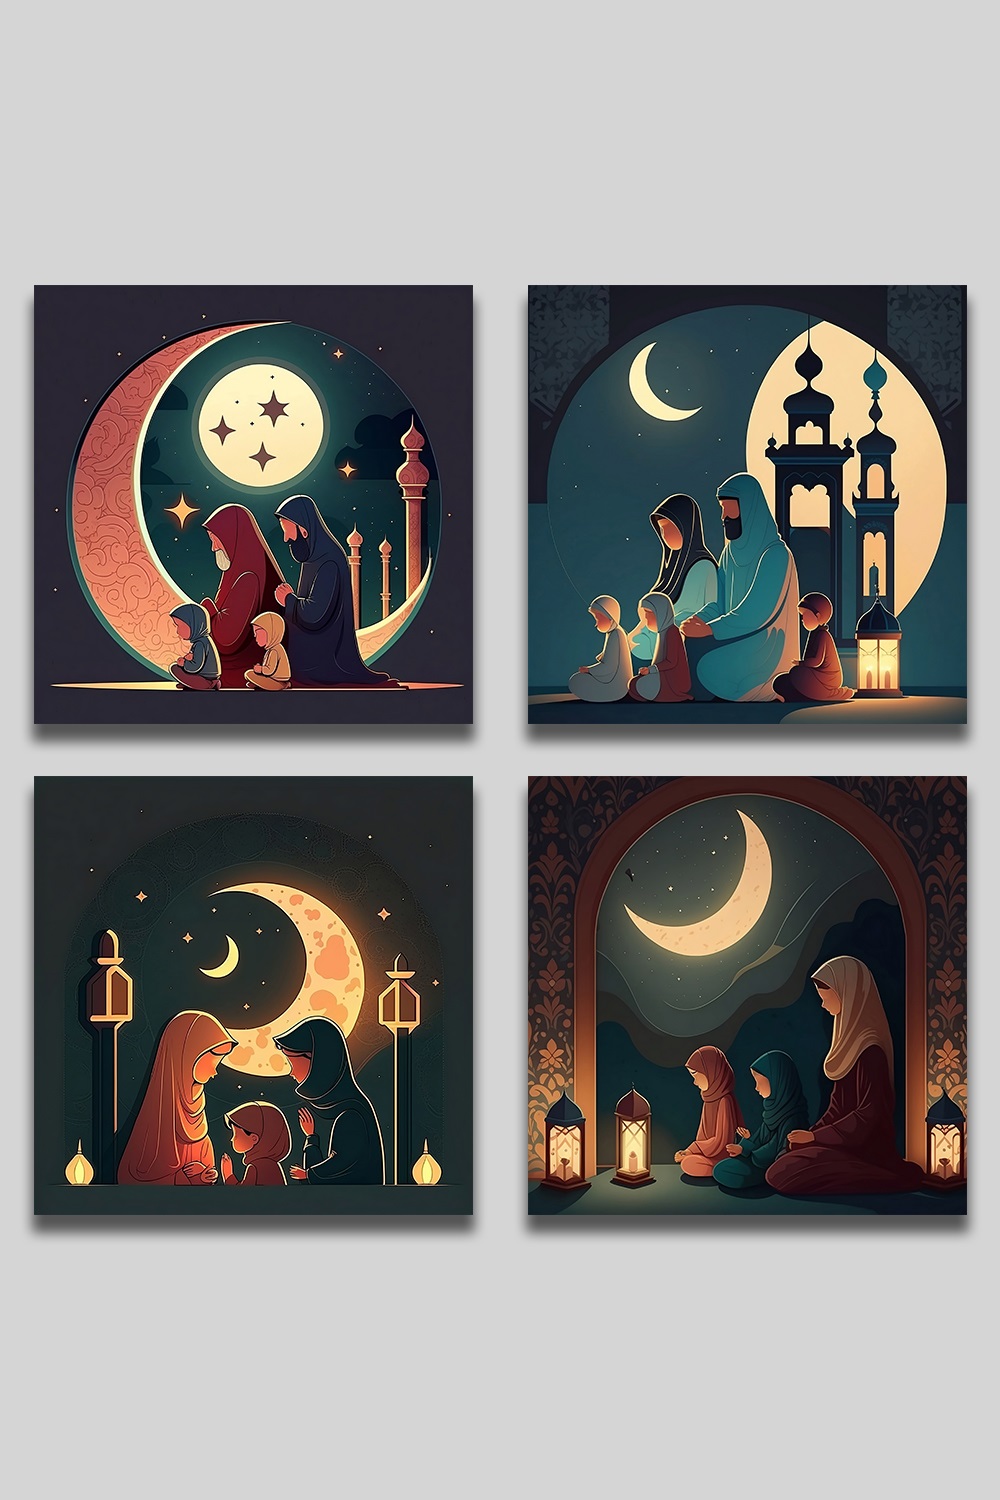 A Muslim family Praying Time Illustration pinterest preview image.